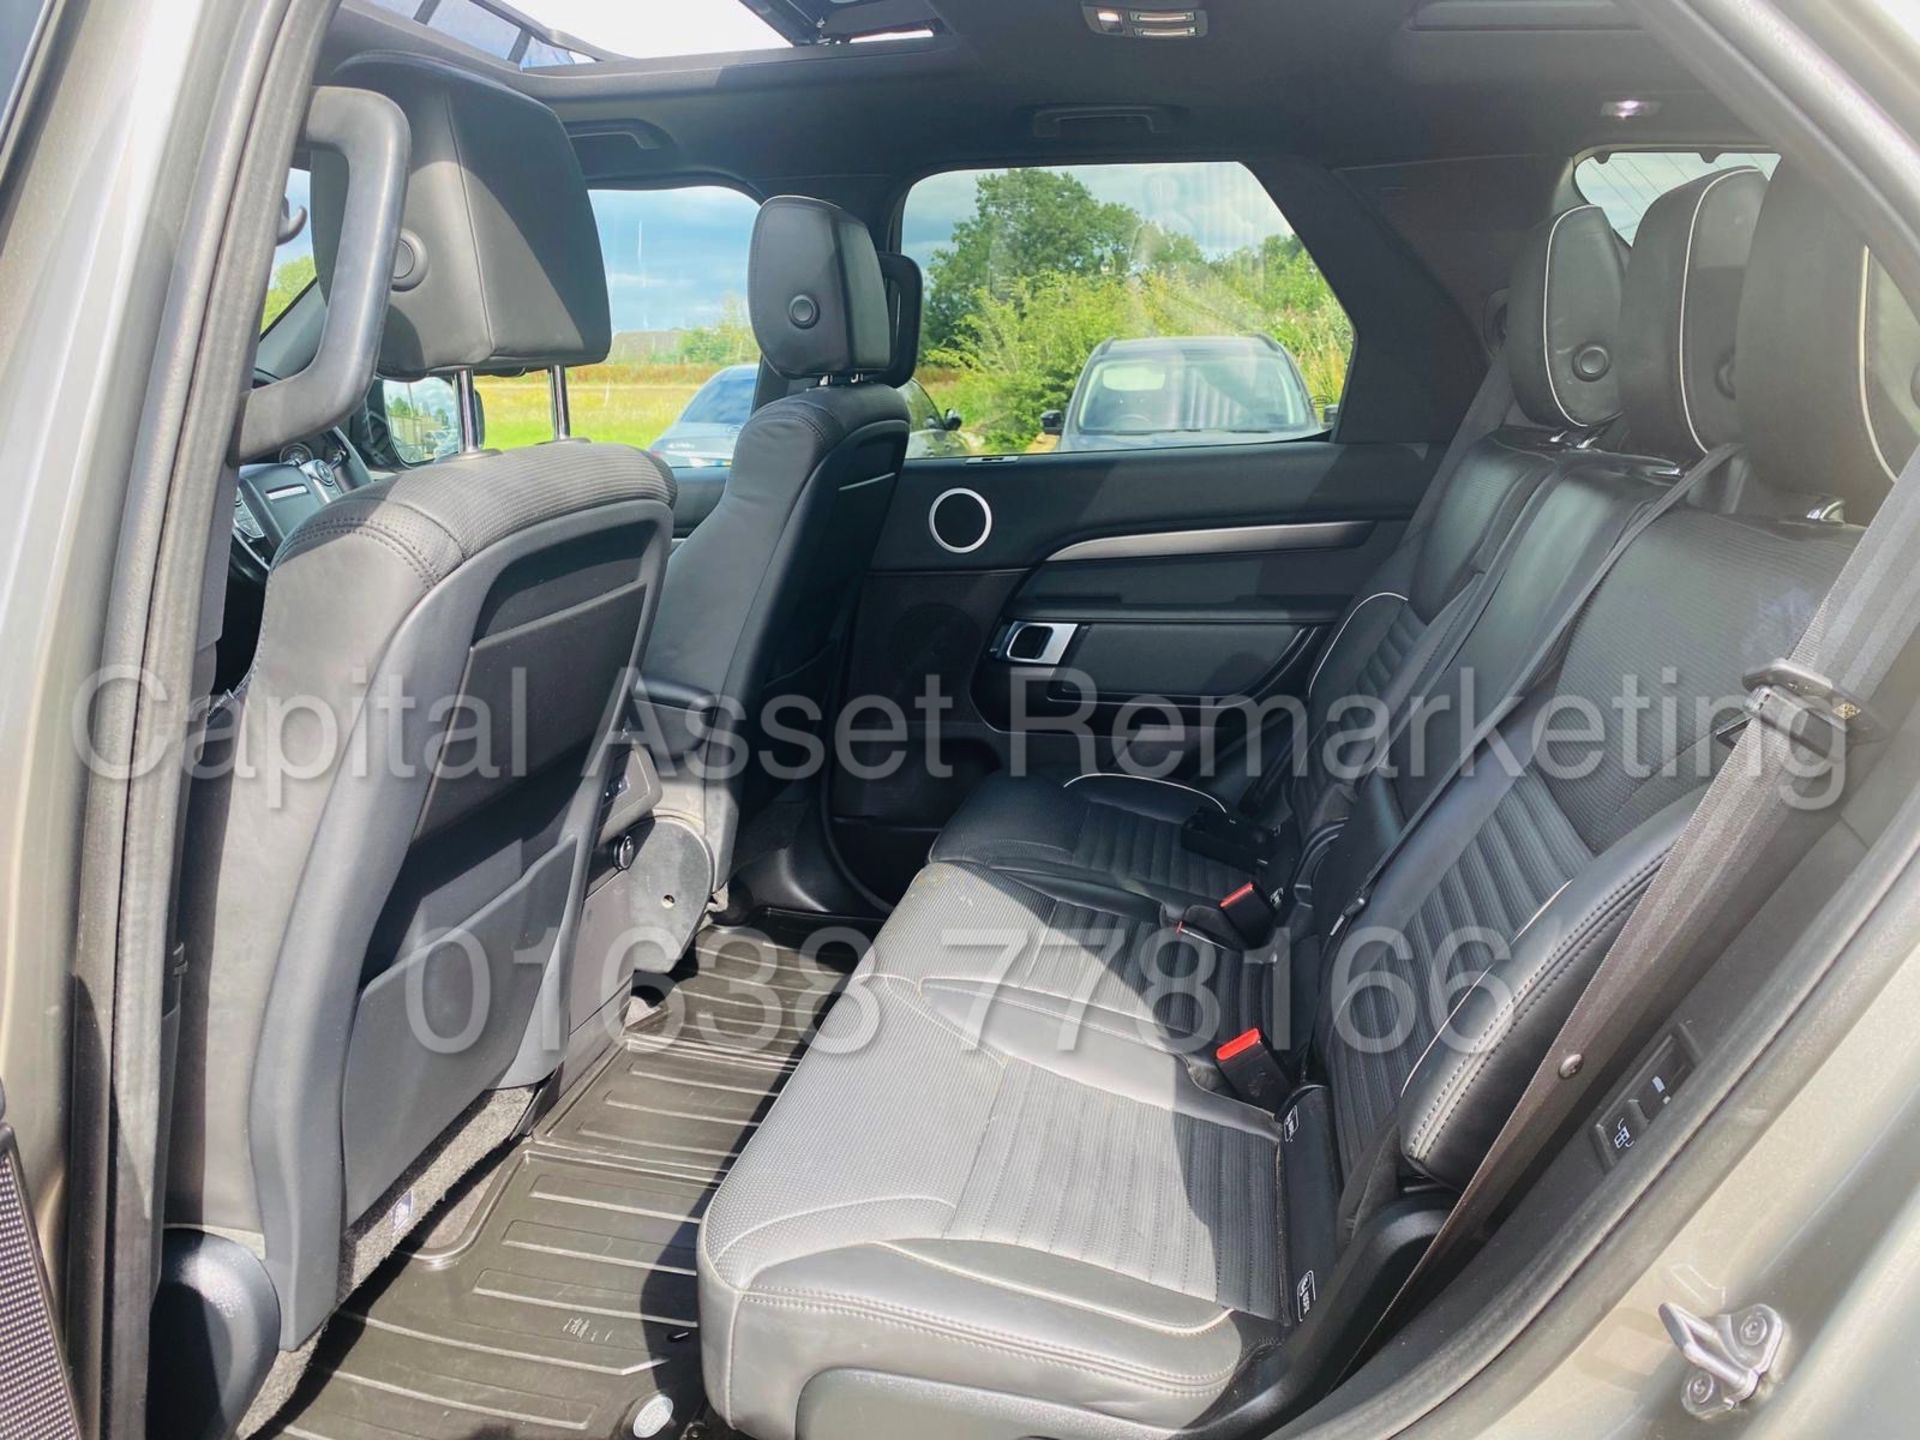 (On Sale) LAND ROVER DISCOVERY *HSE* 7 SEATER (2017 - NEW MODEL) '3.0 TD6 - 258 BHP - 8 SPEED AUTO' - Image 29 of 68